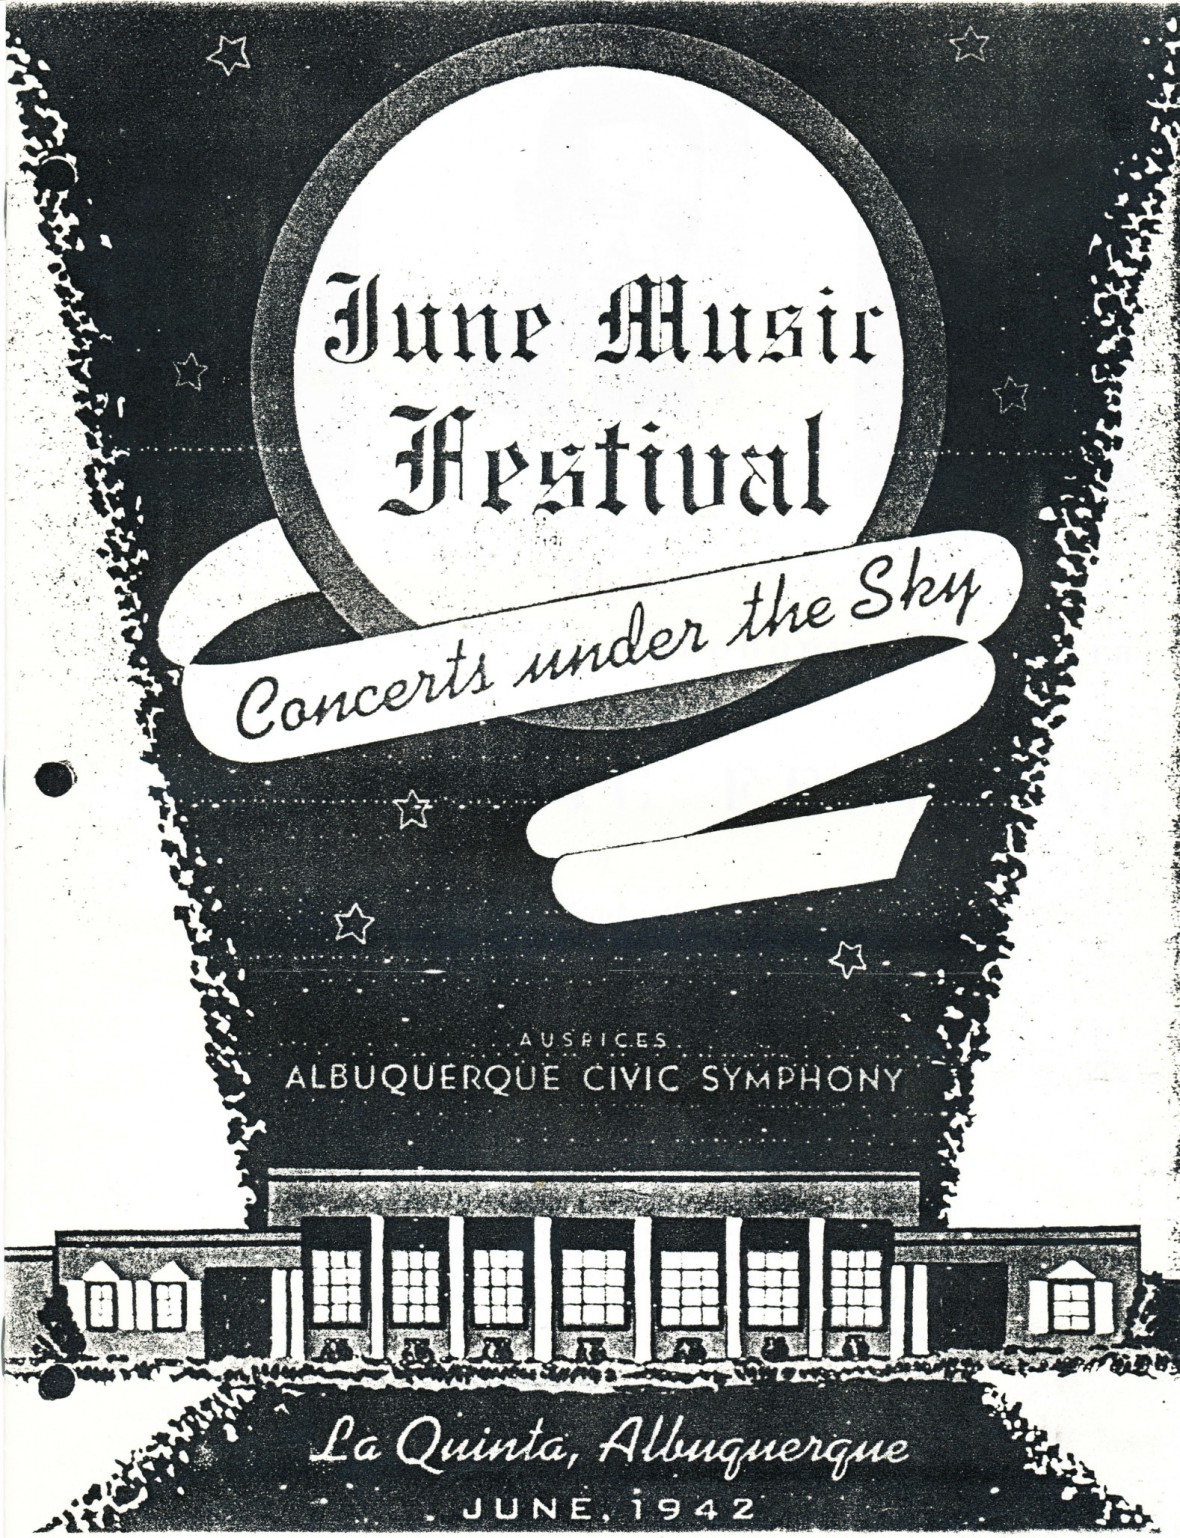 Program cover from the first June music festival held at La Quinta Cultural Center in 1942